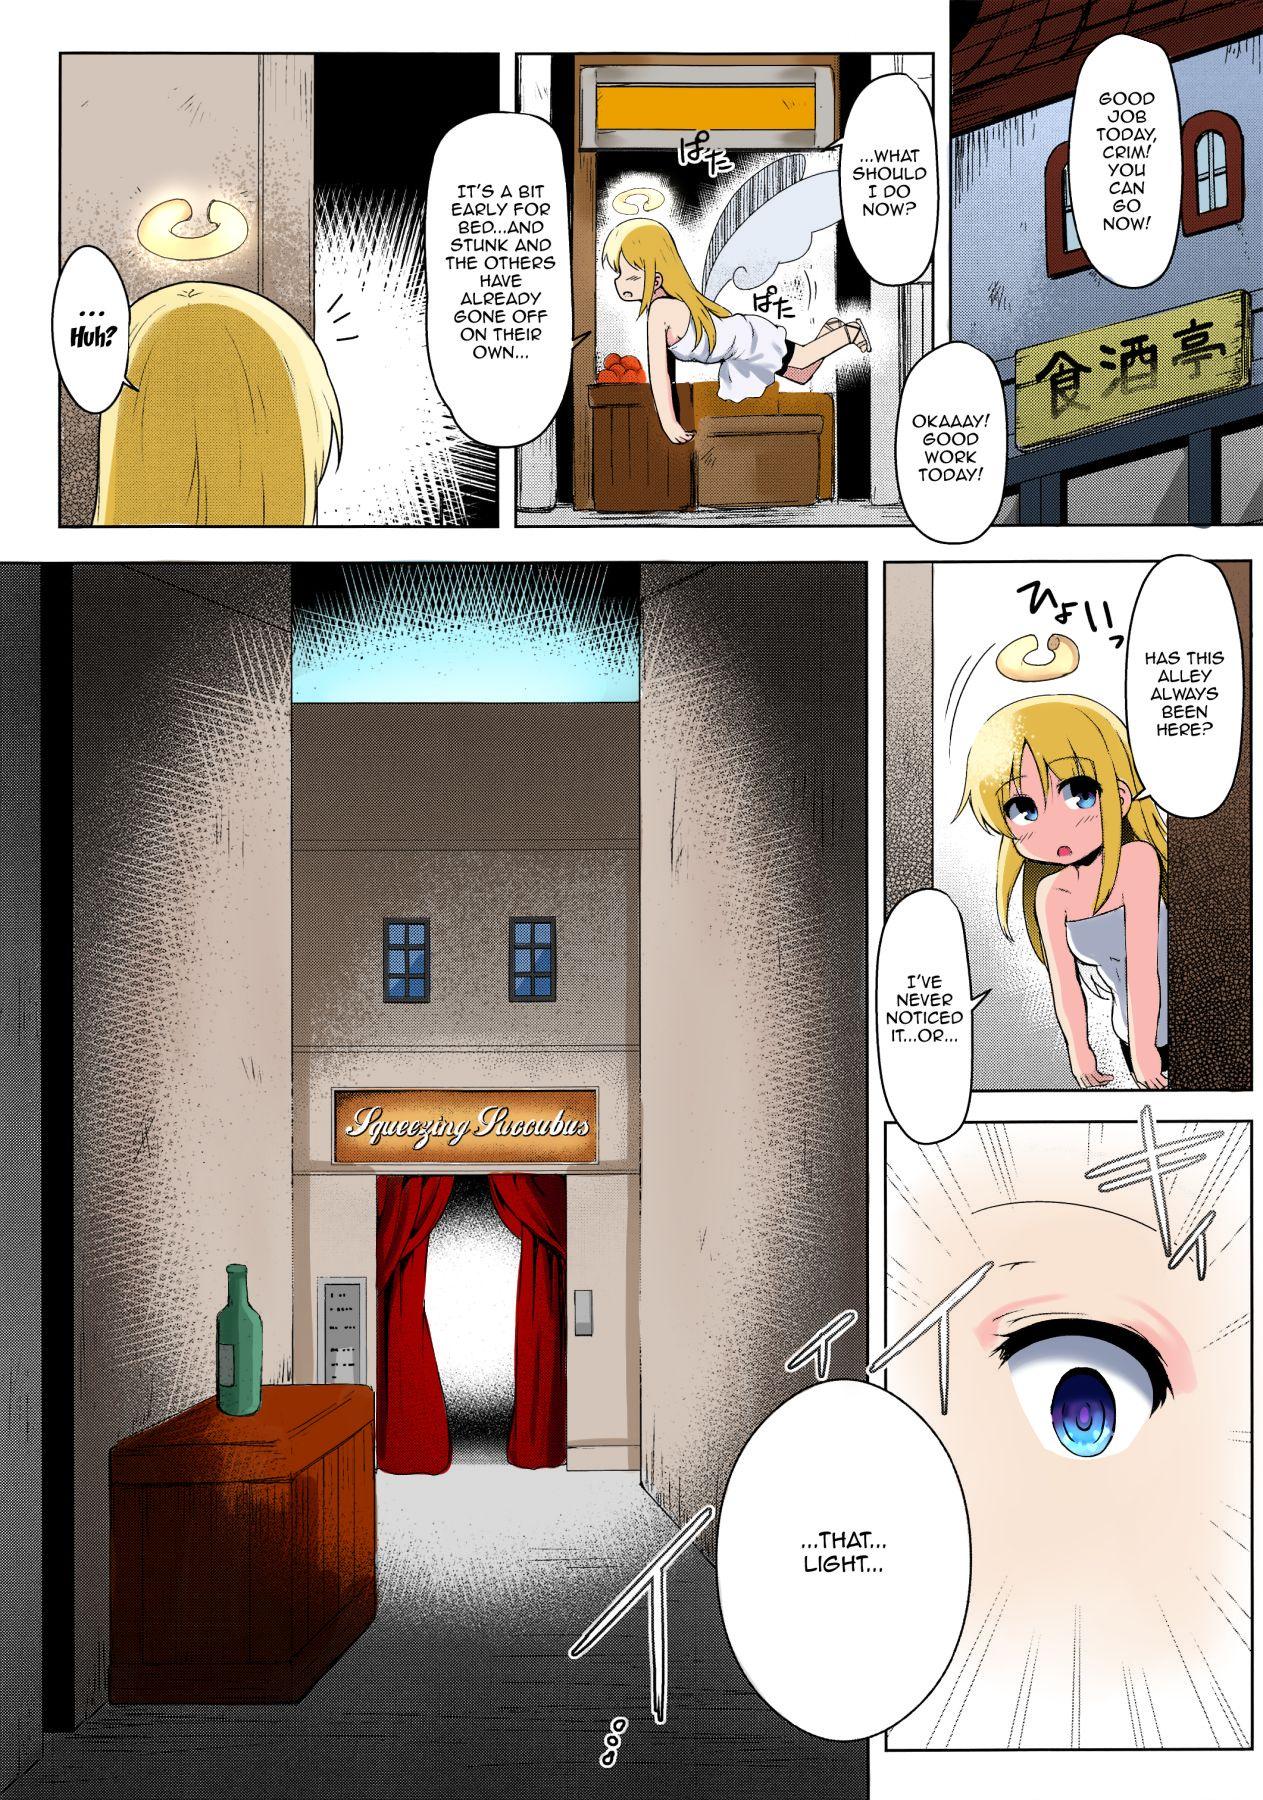 Gay Domination [C.R's NEST (C.R)] Tenshi-Kun Reviewers | Angel-kun Reviewers (Ishuzoku Reviewers) [English] {Doujins.com} [Colorized] - Ishuzoku reviewers First Time - Page 2